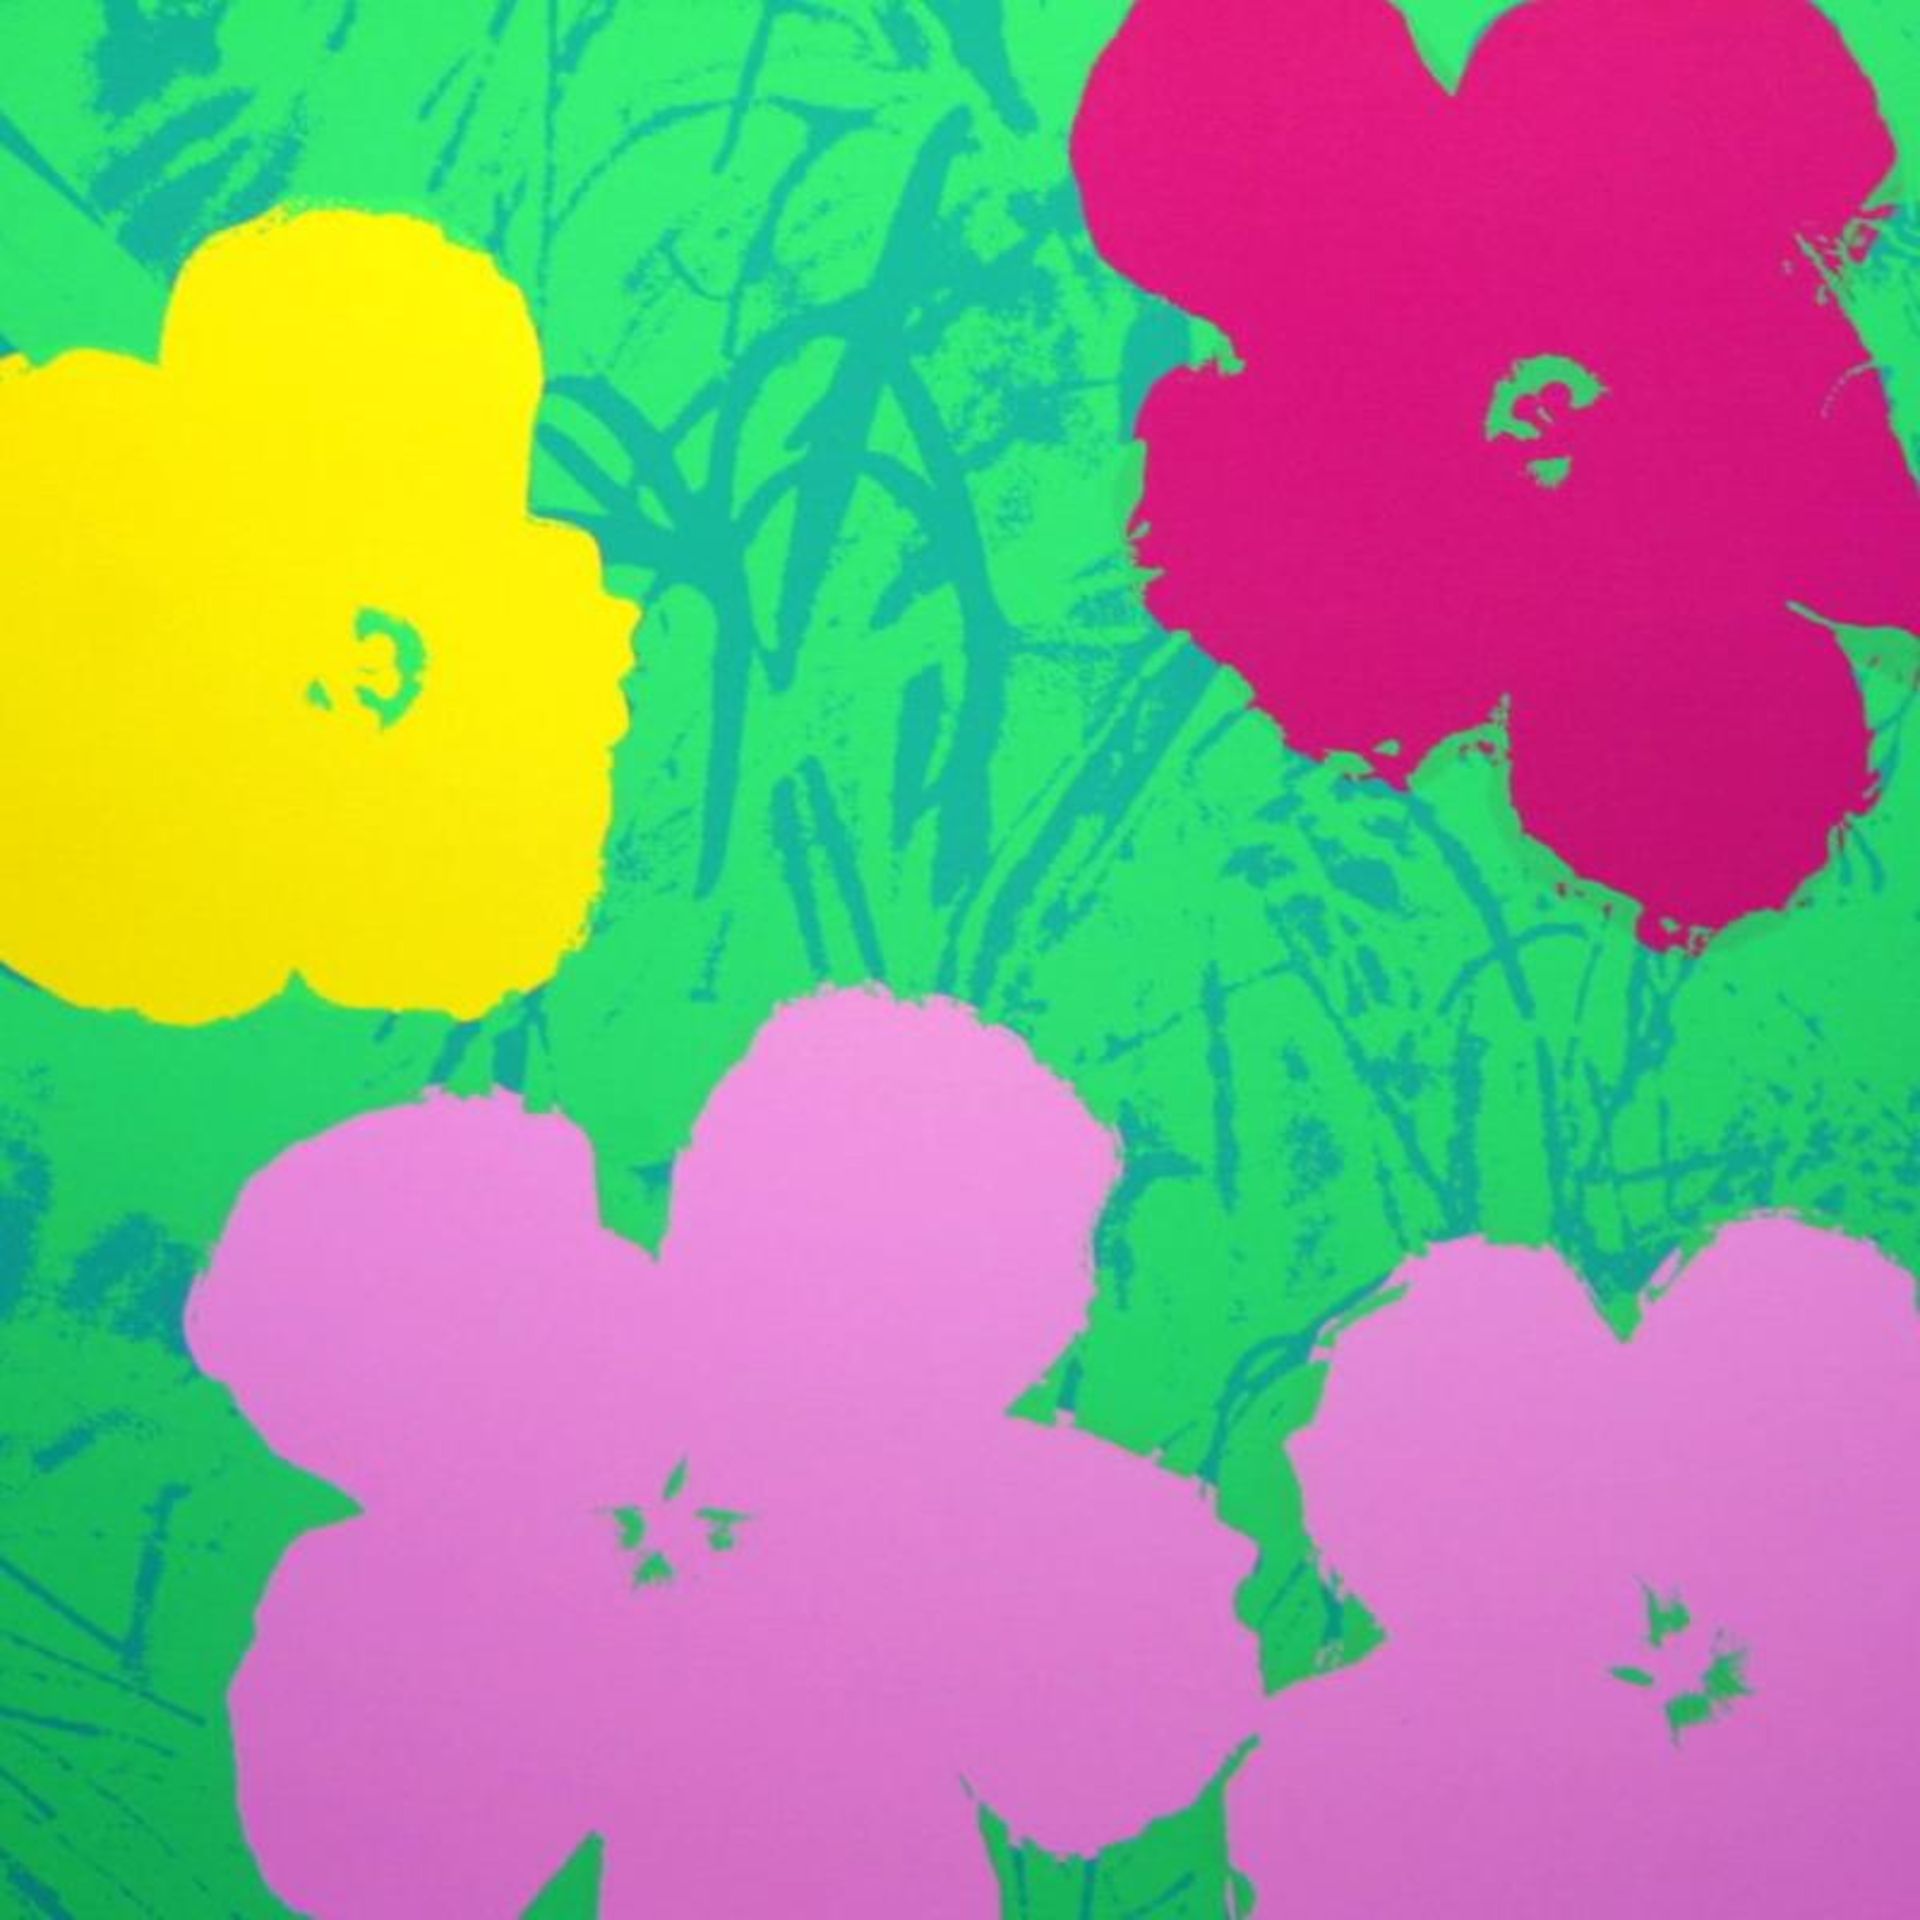 Flowers 11.68 by Warhol, Andy - Image 2 of 2